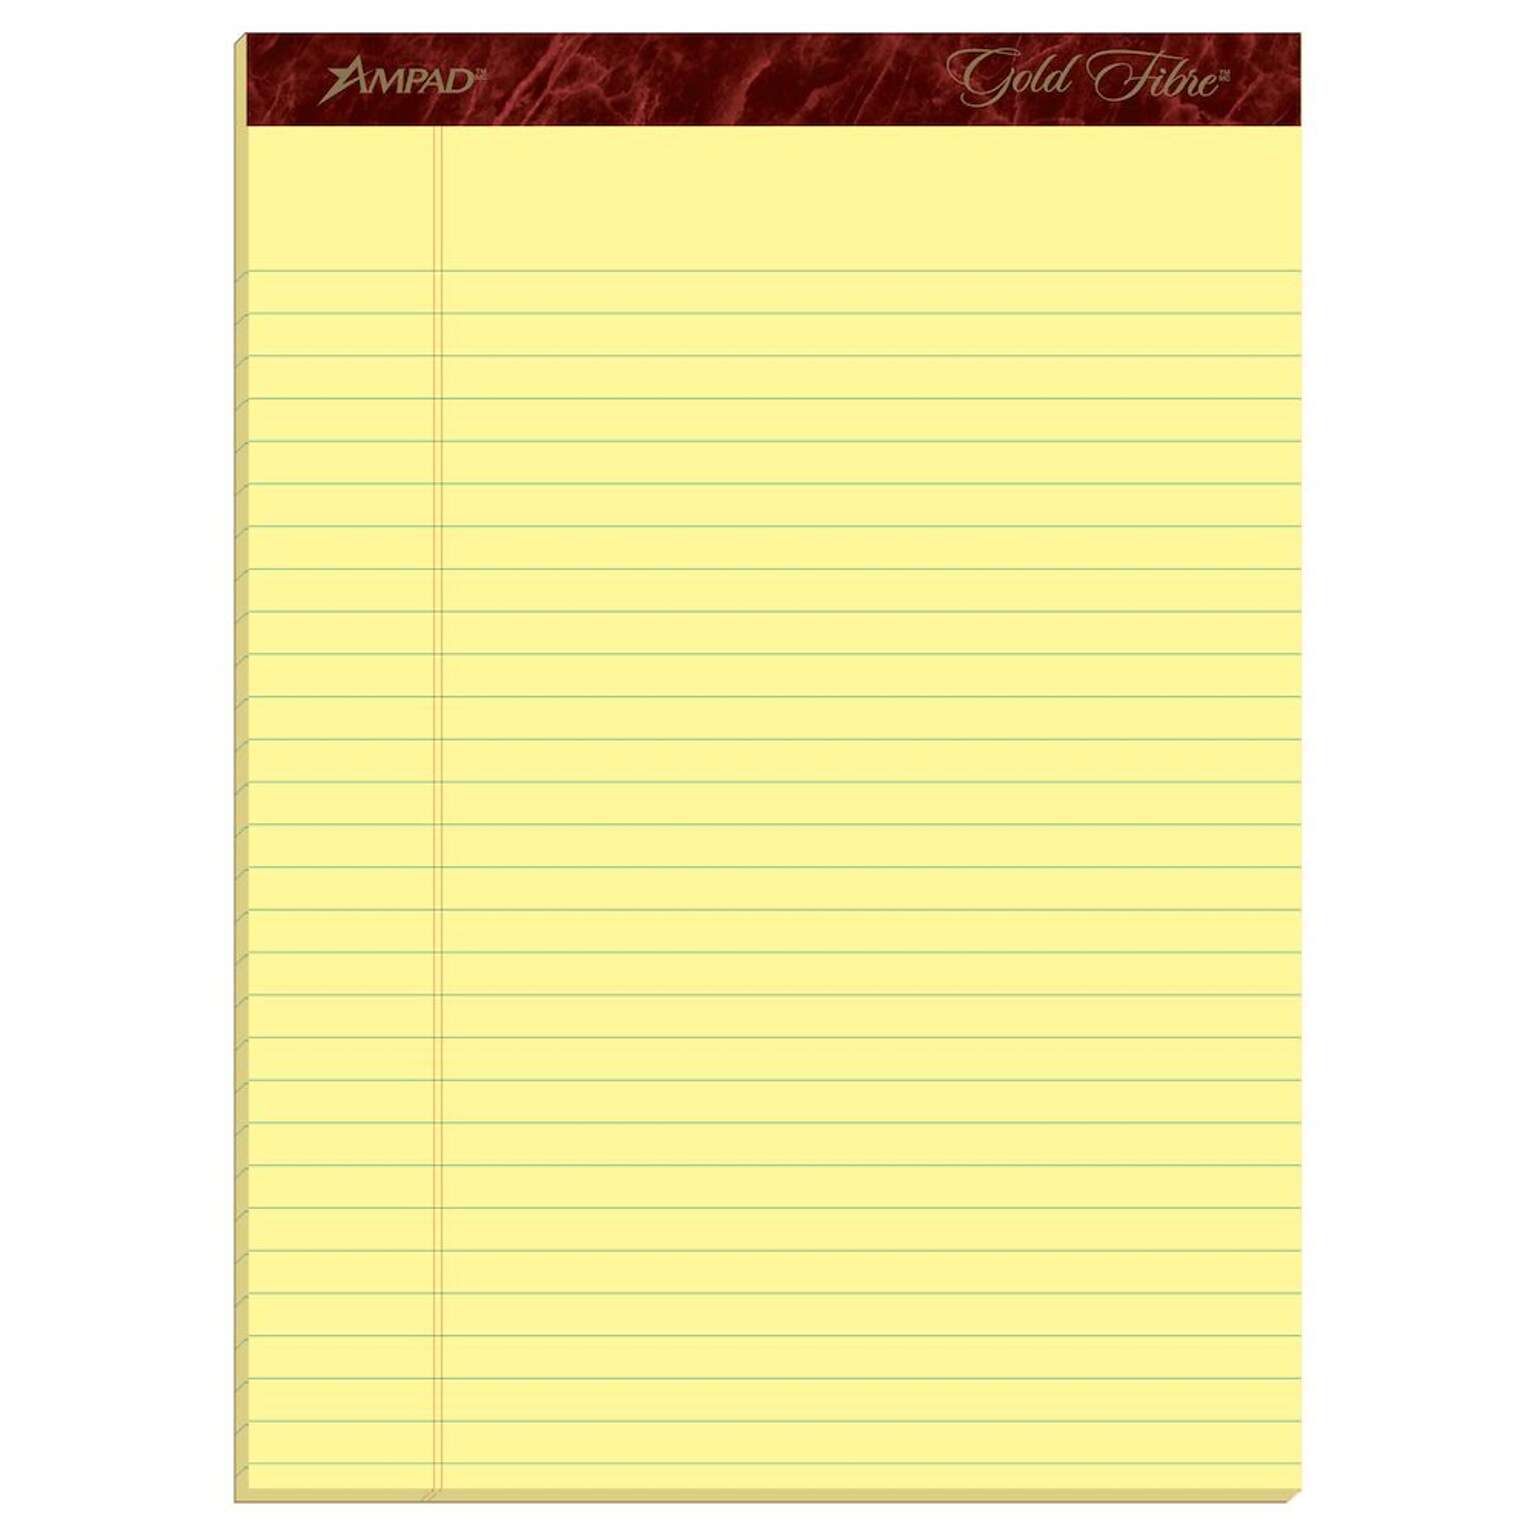 Ampad Gold Fibre Notepads, 8.5 x 11.75, Wide Ruled, Canary, 50 Sheets/Pad, 4 Pads/Pack (TOP20-032R)